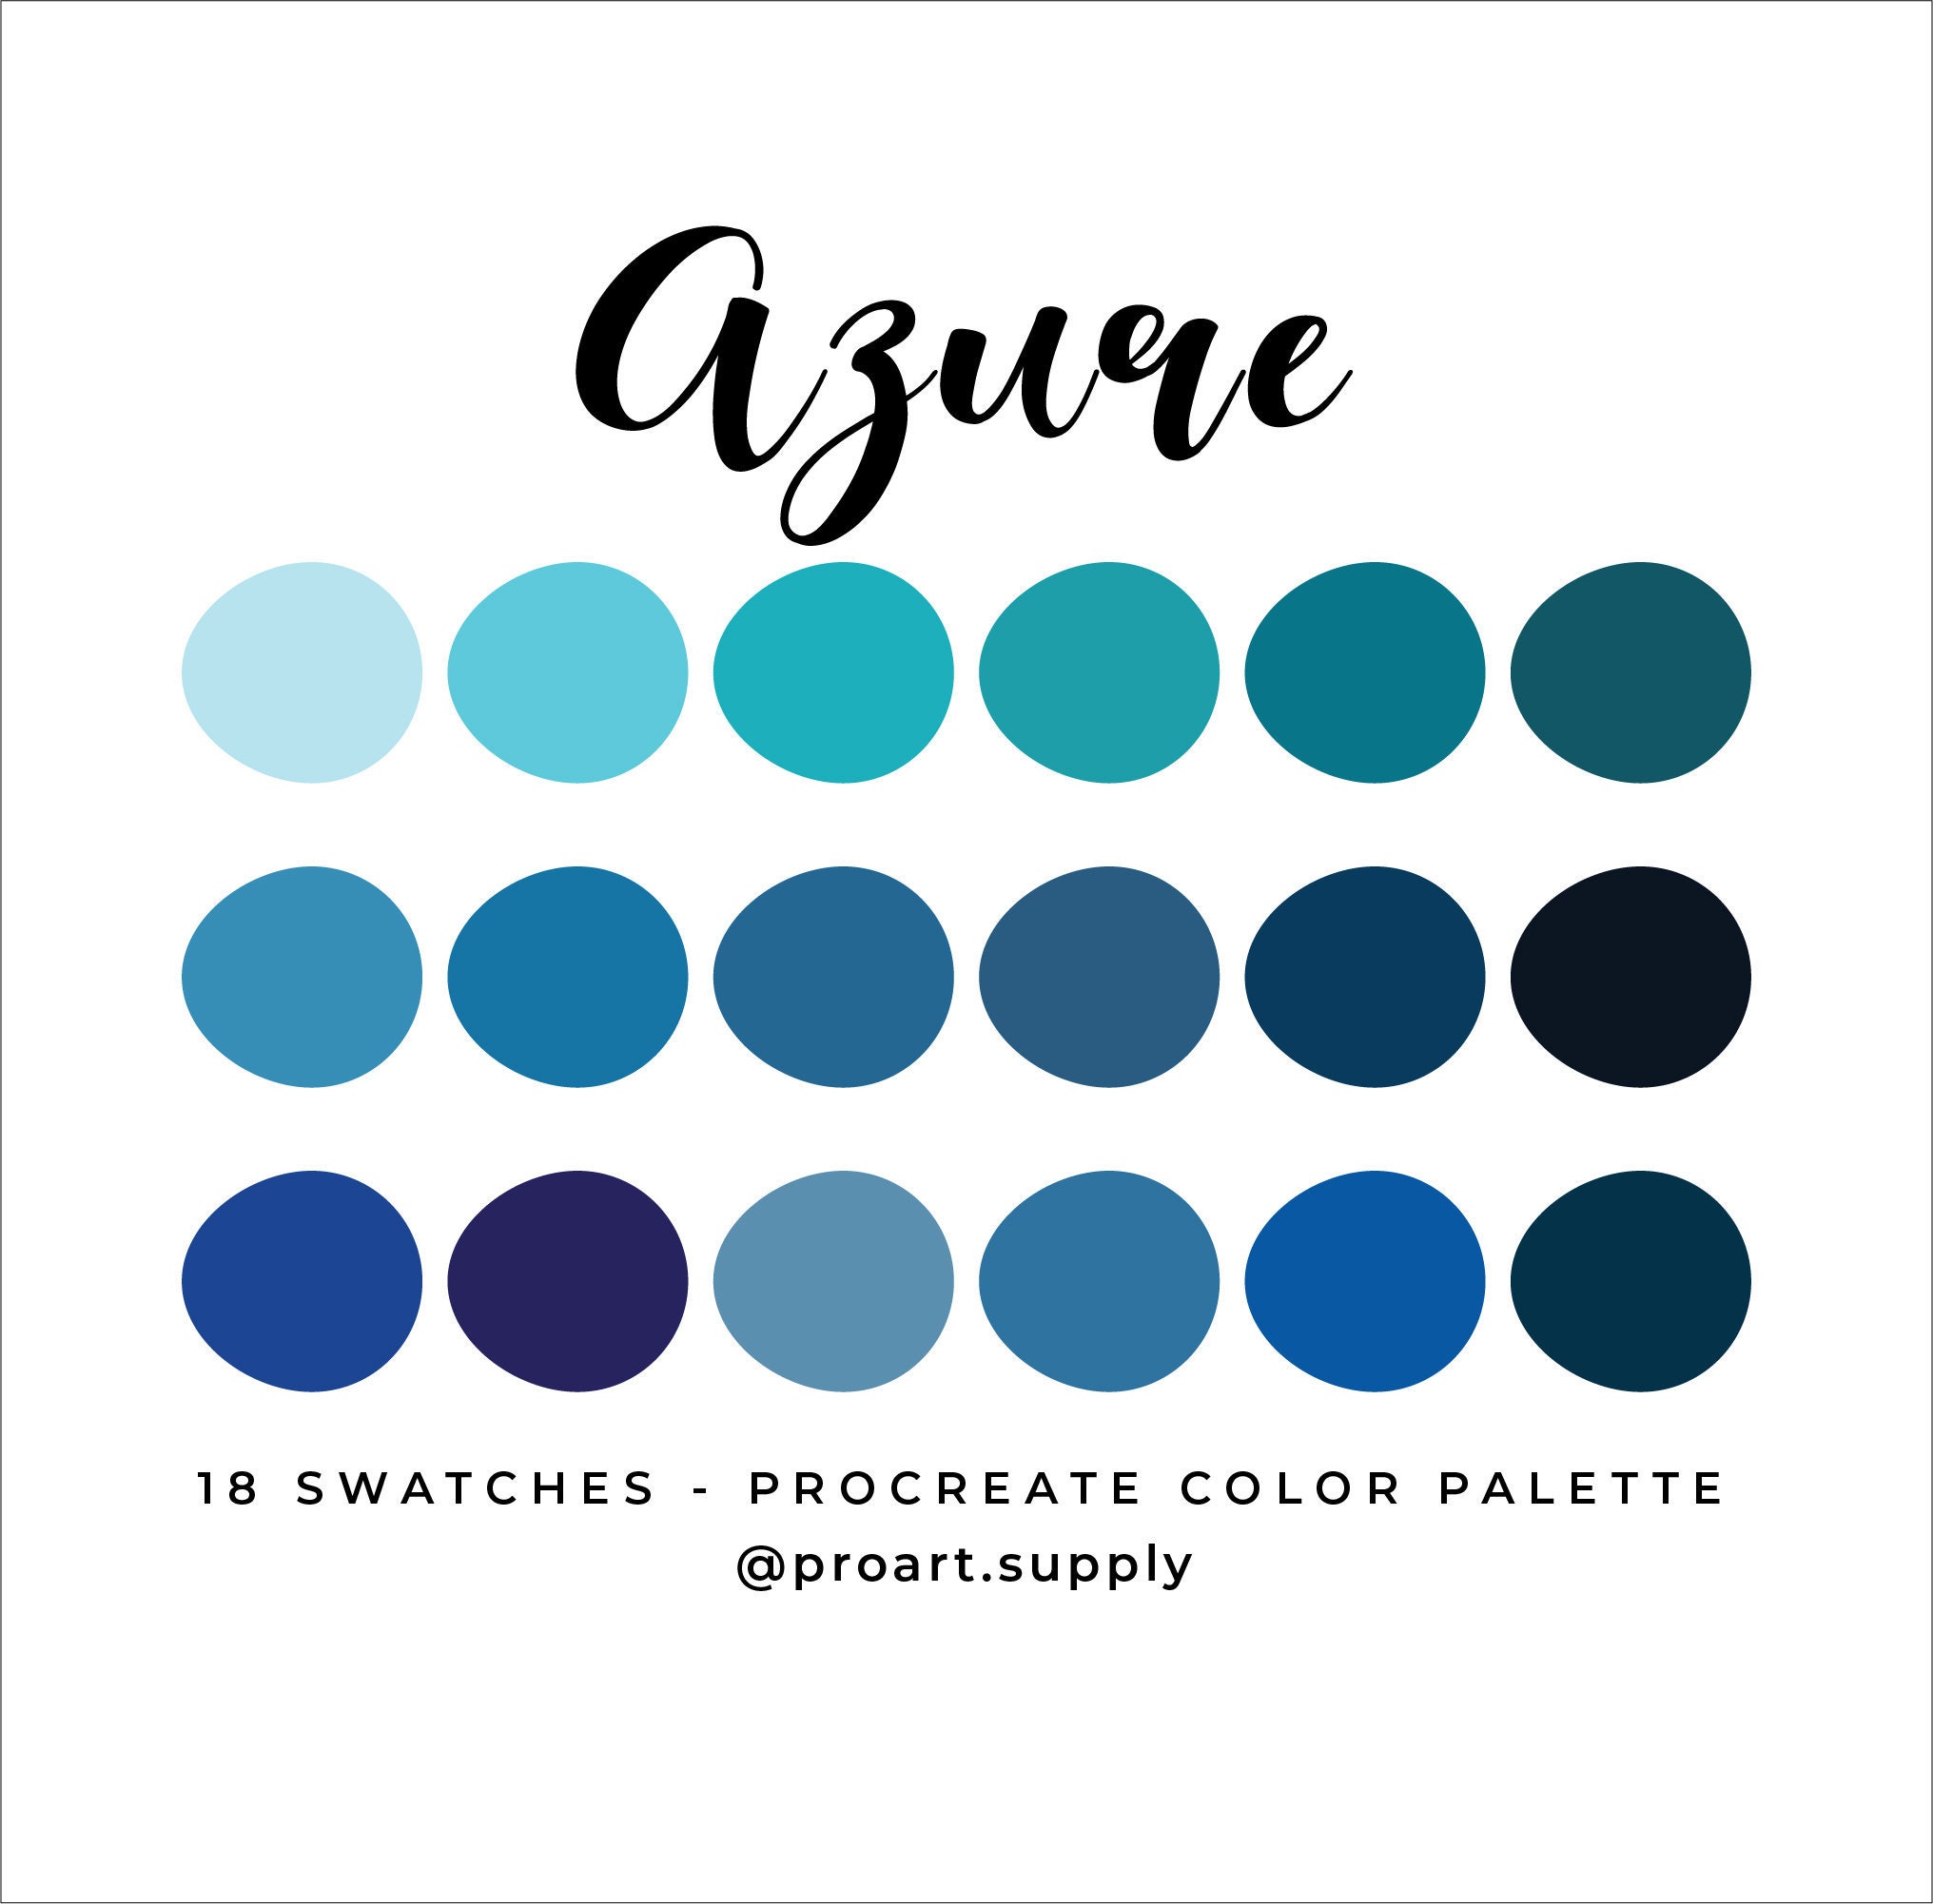 AZURE PROCREATE COLOR Palette Hex Codes Blue, Teal, Navy for iPad Digital  Illustration Swatches - Etsy